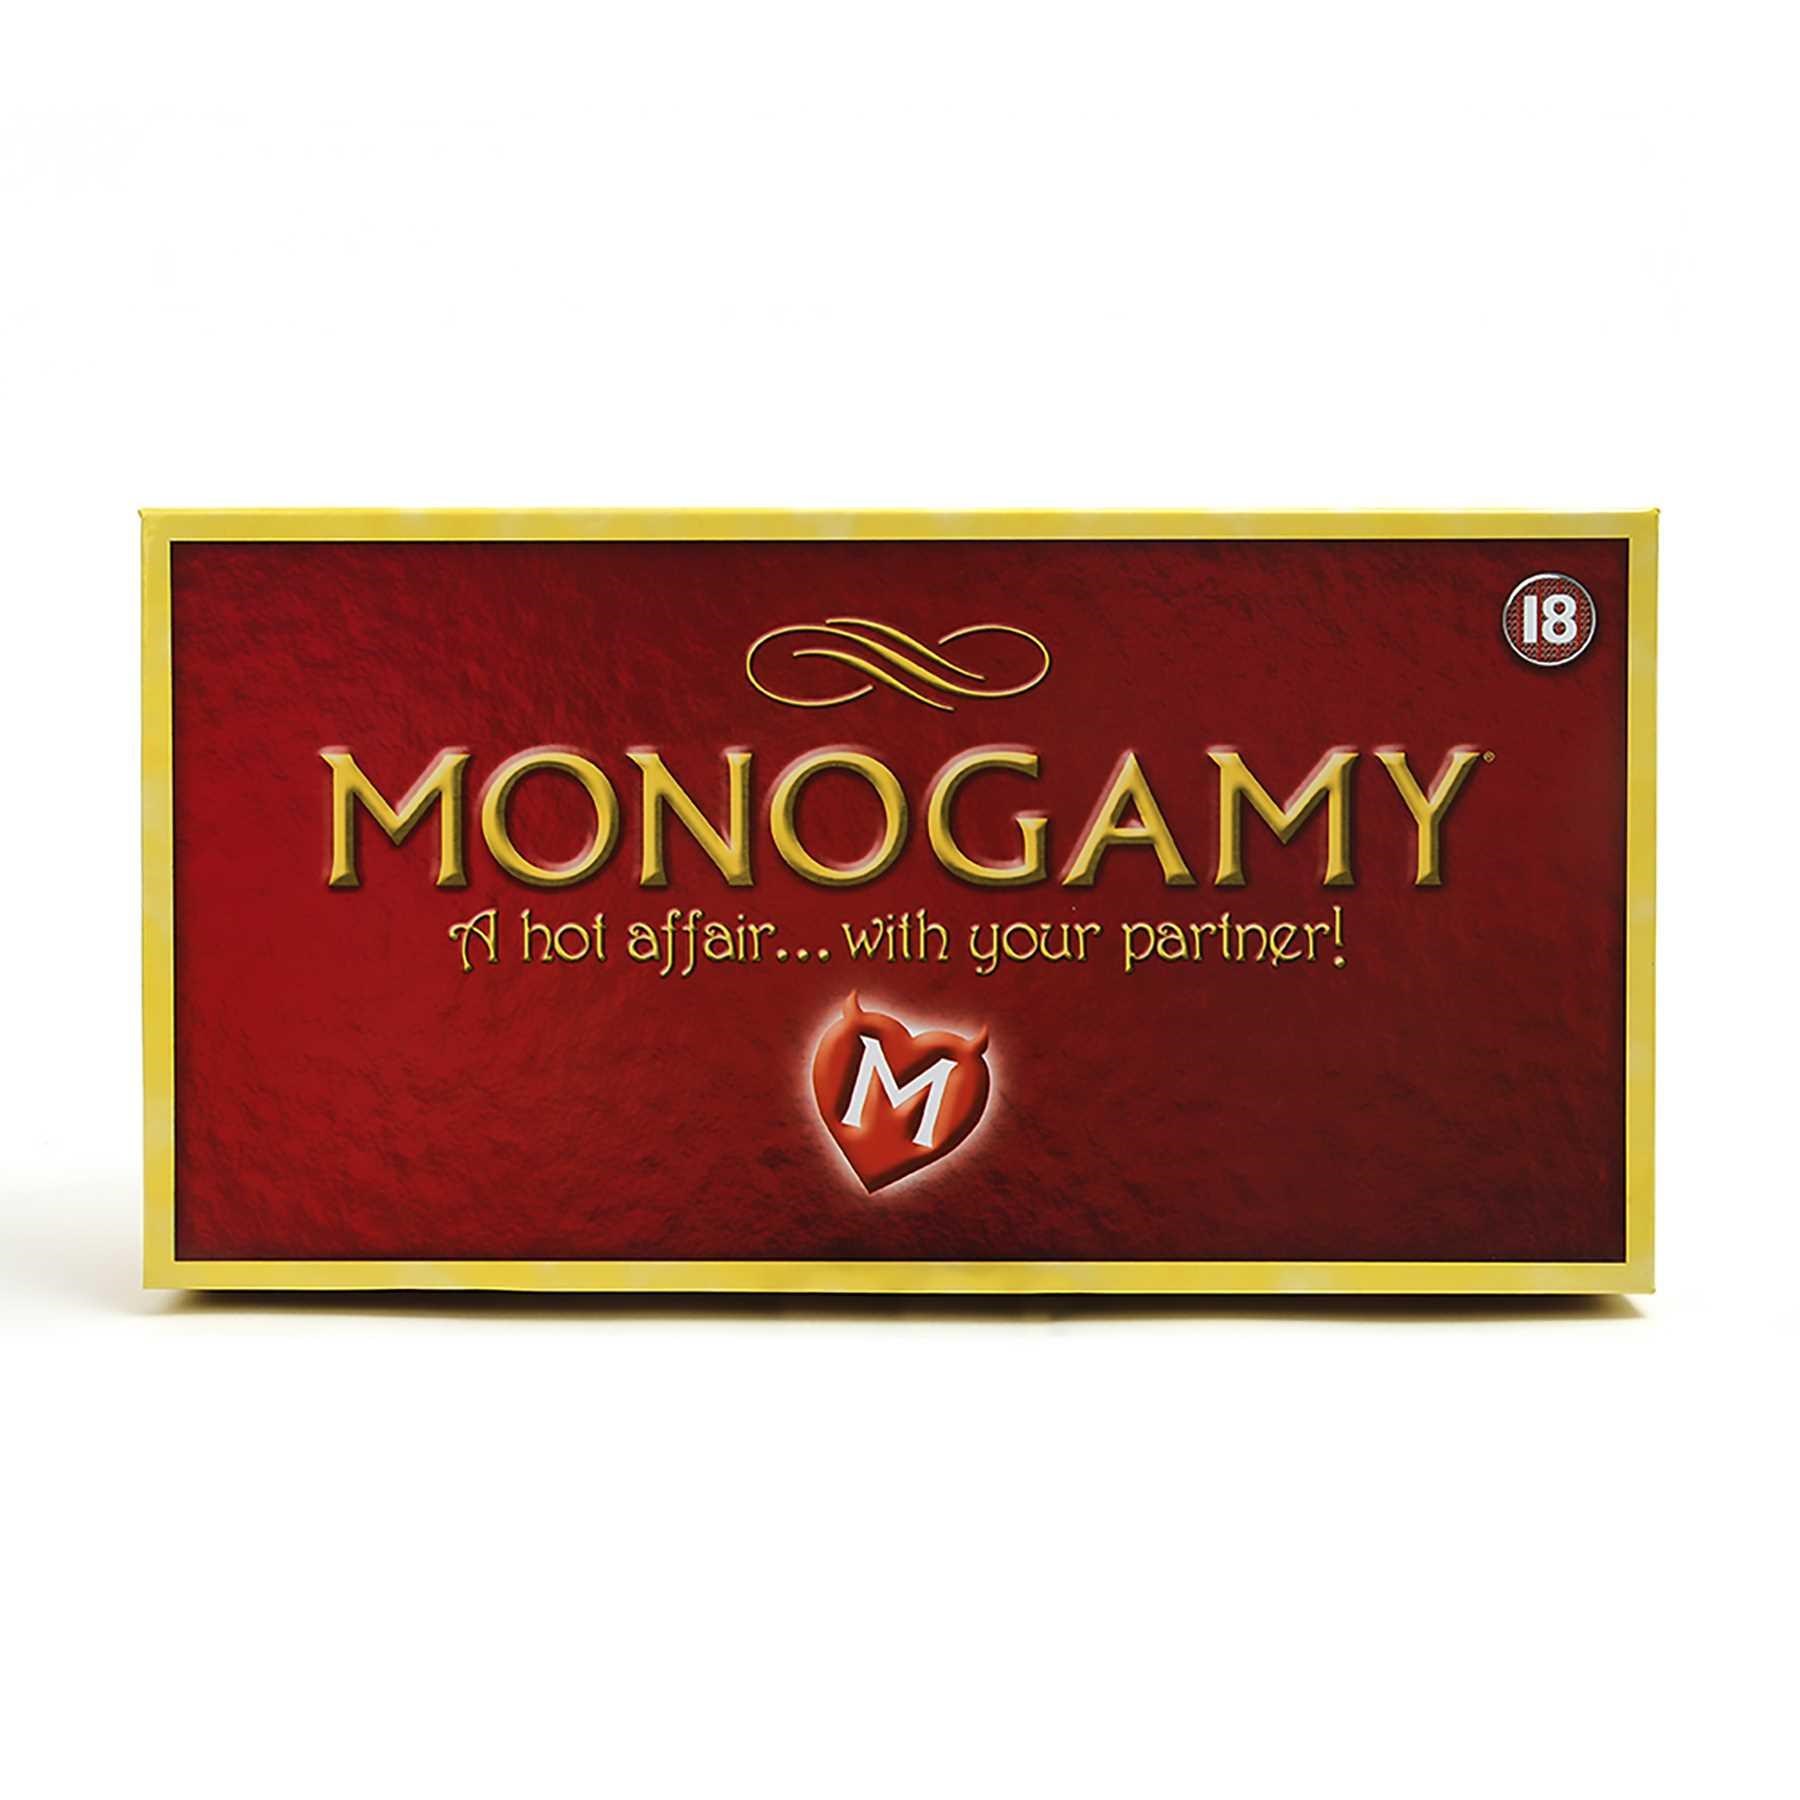 Monogamy A Hot Affair With Your Partner Game Box and game components English